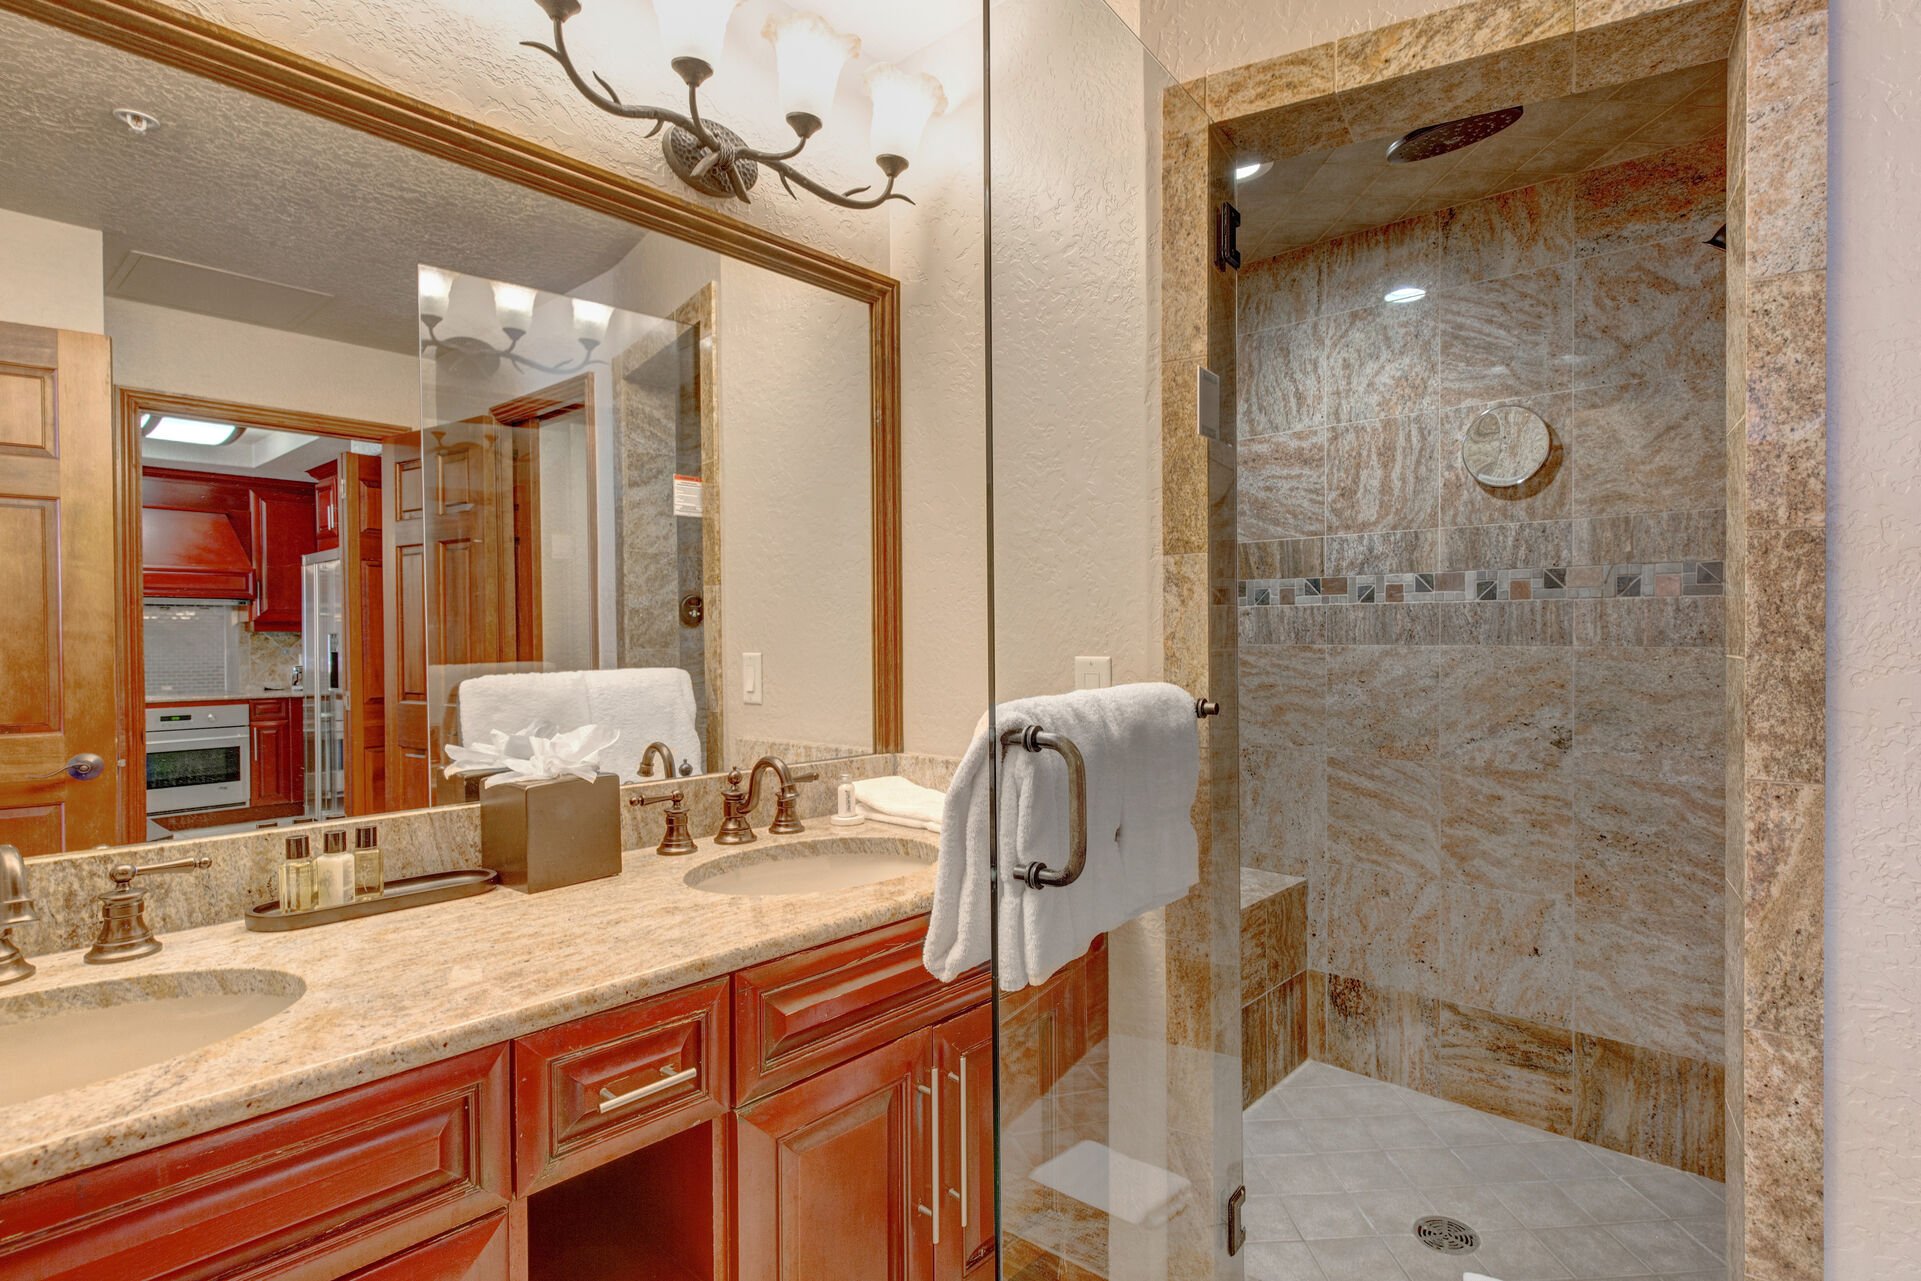 Jack-n-Jill Bathroom with dual sinks, large tiled shower, separate wash closet and Master Bedroom access